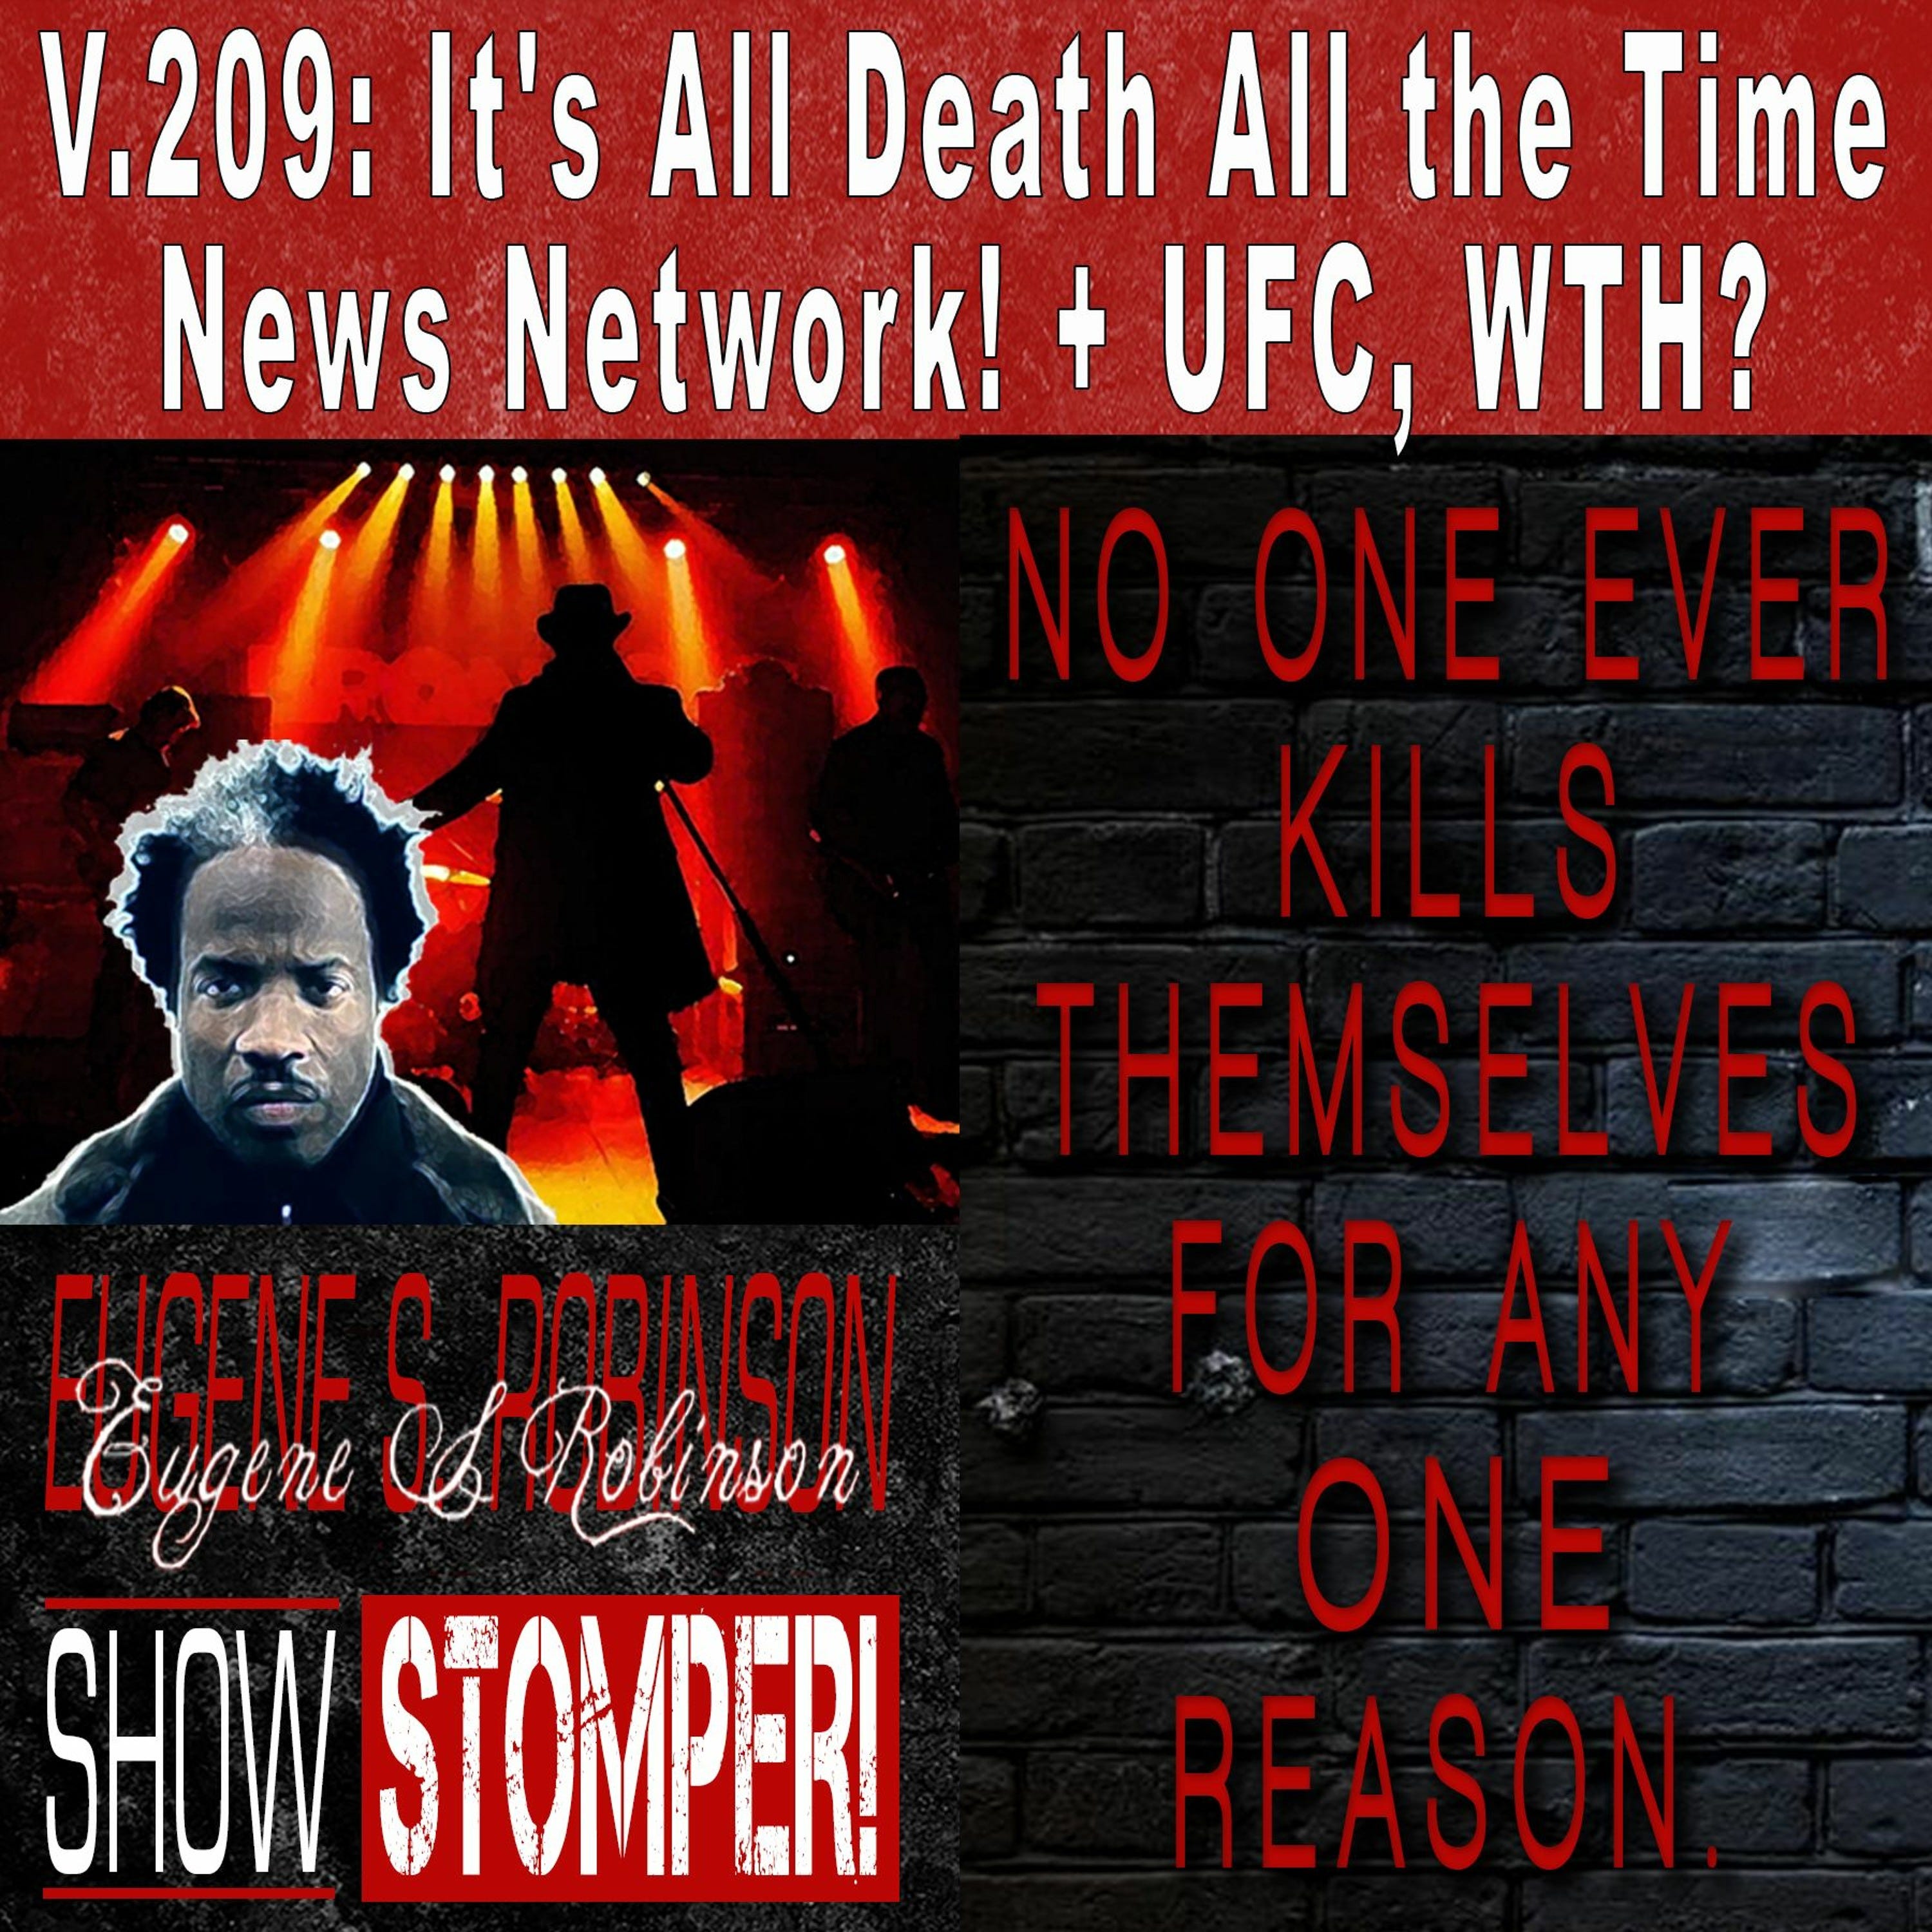 V.209: It's All Death All the Time News Network! + UFC, WTH? On The Eugene S. Robinson Show Stomper!